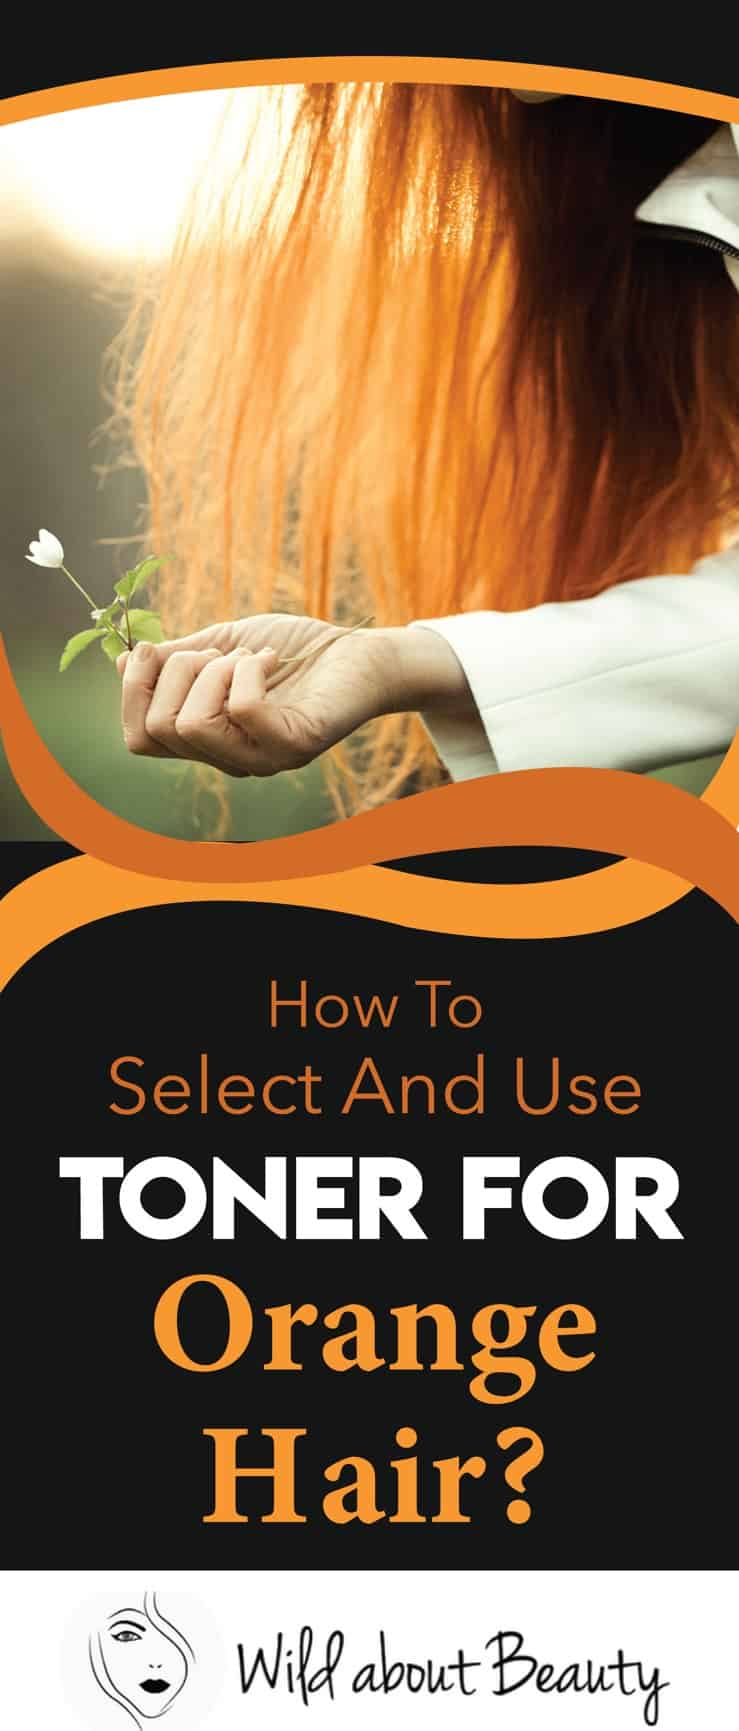 How To Select And Use Toner For Orange Hair